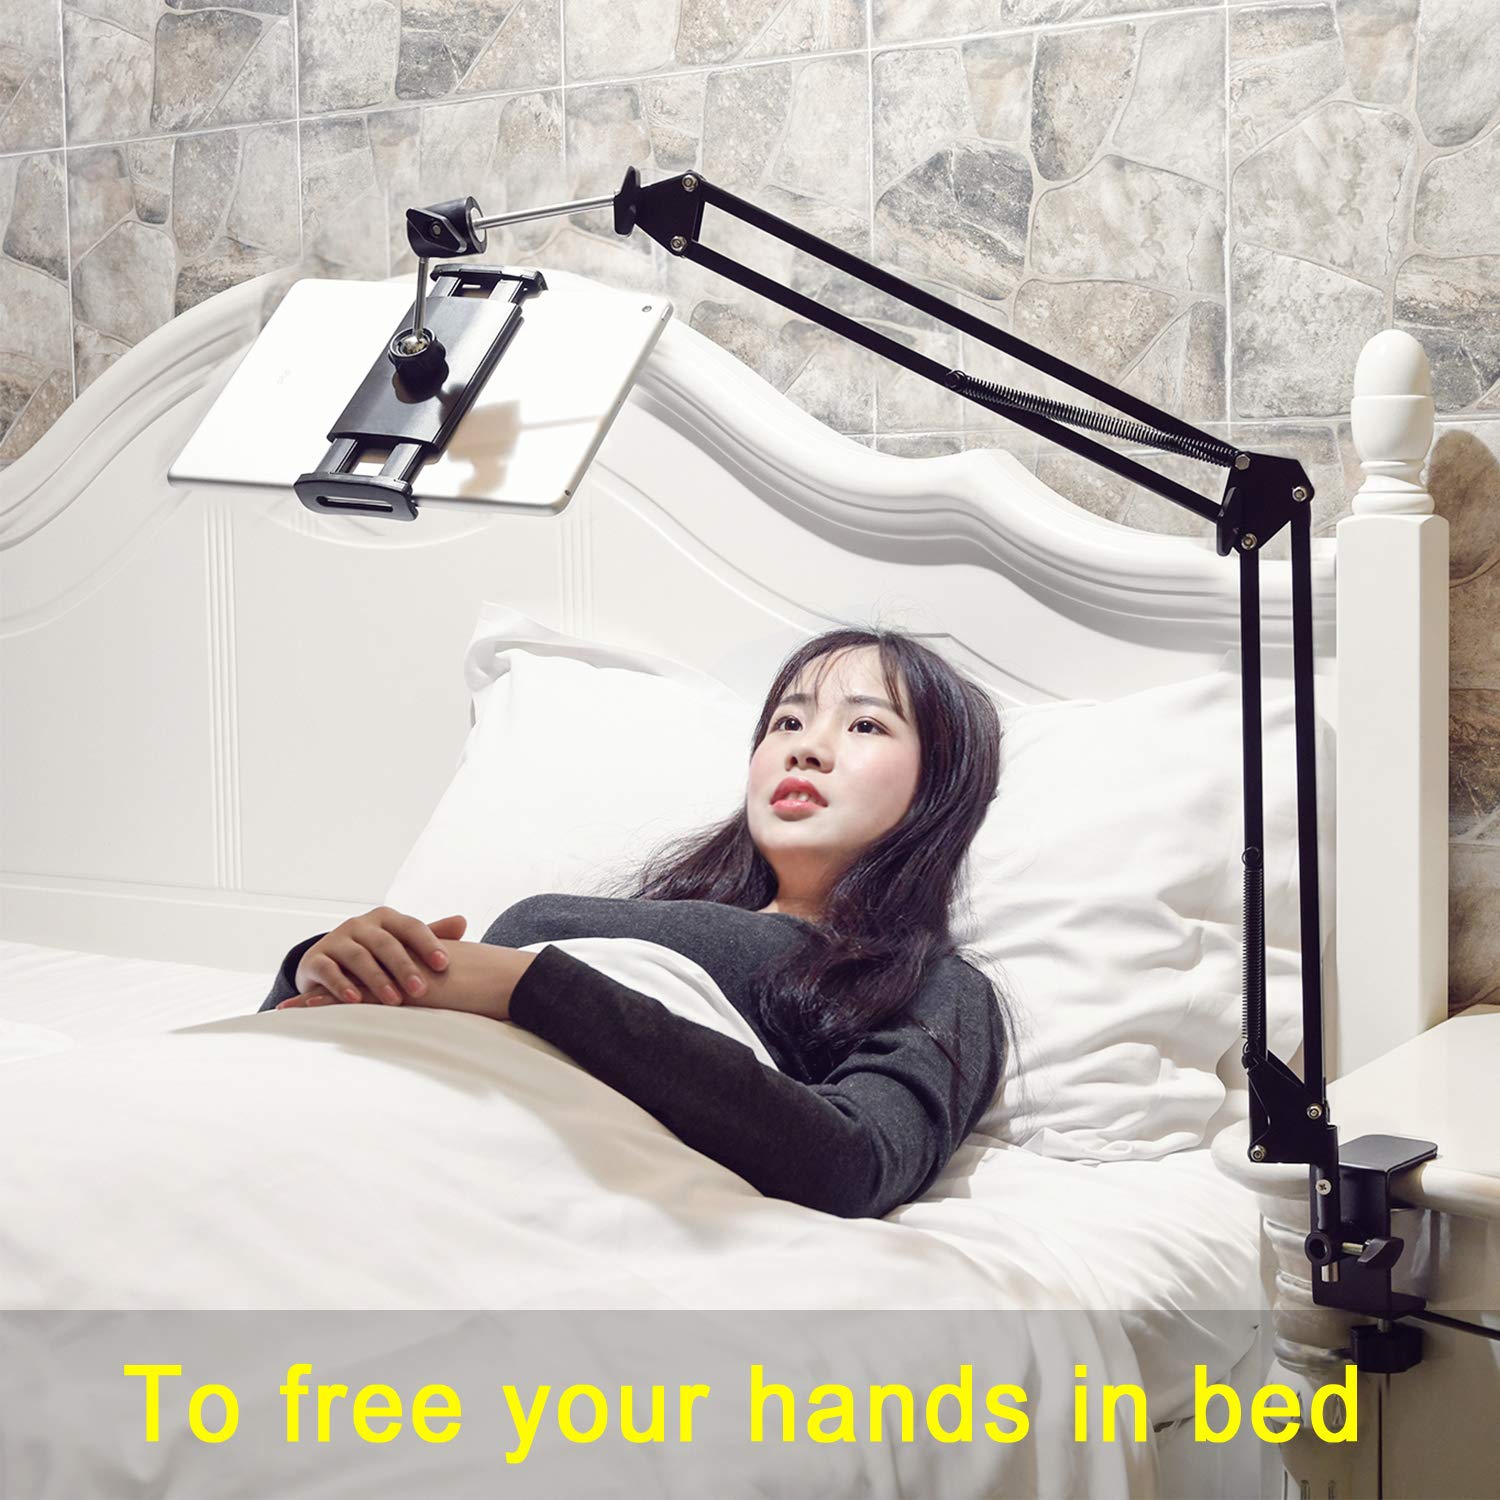 ipad holder for bed,360 Degree Rotating tablet holder for bed with Aluminum Arm for iPad,iPhoneXS, N-Switch, Kindle Fire,or Other 4.5~12.9 inch Devices